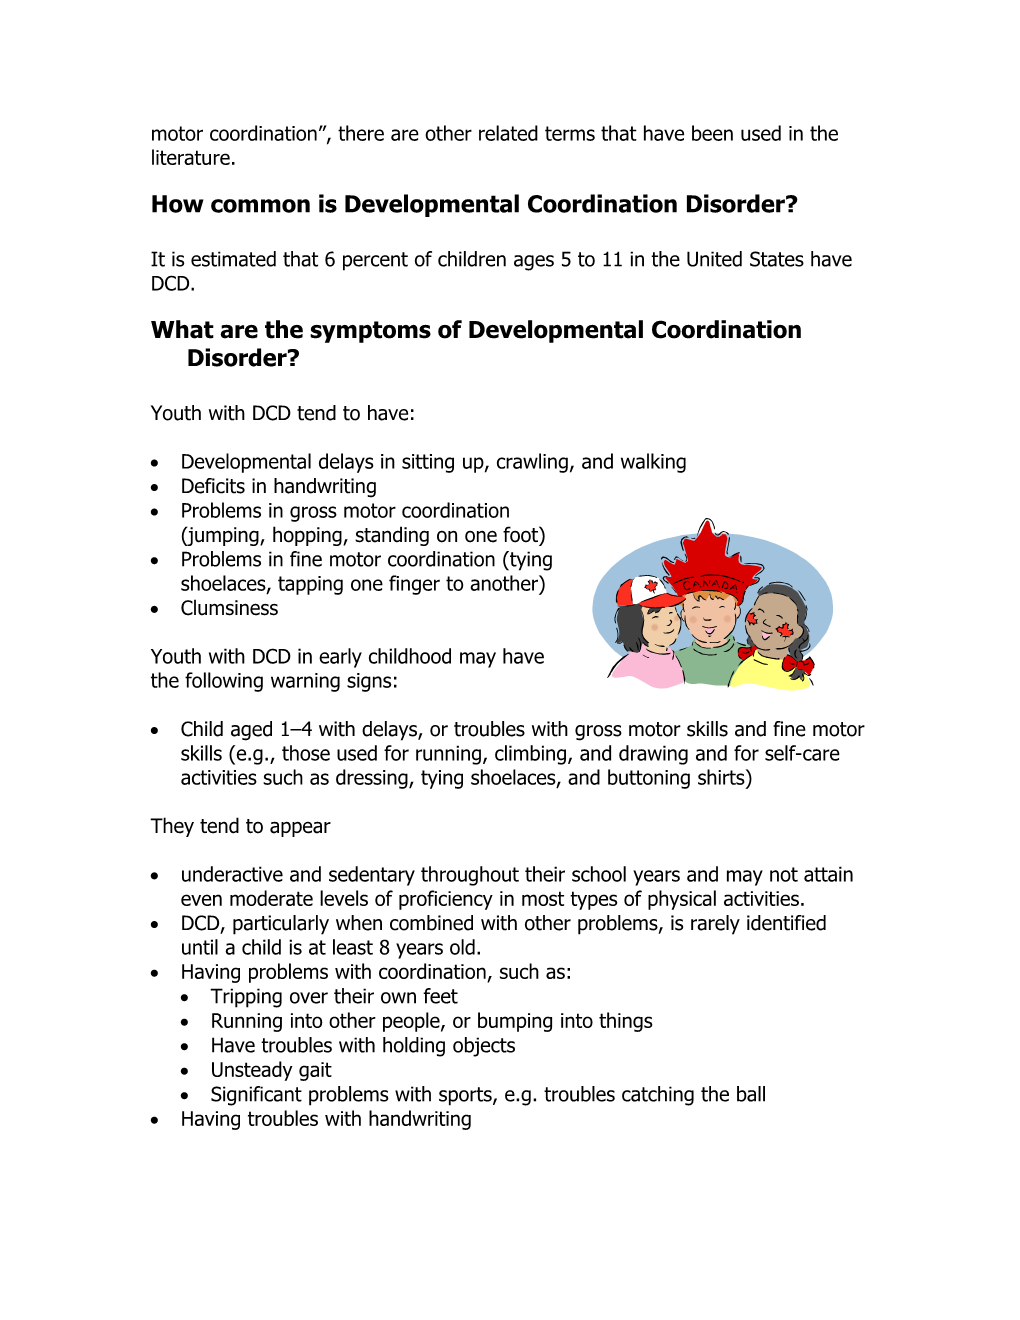 Developmental Coordination Disorder: Guide for Families